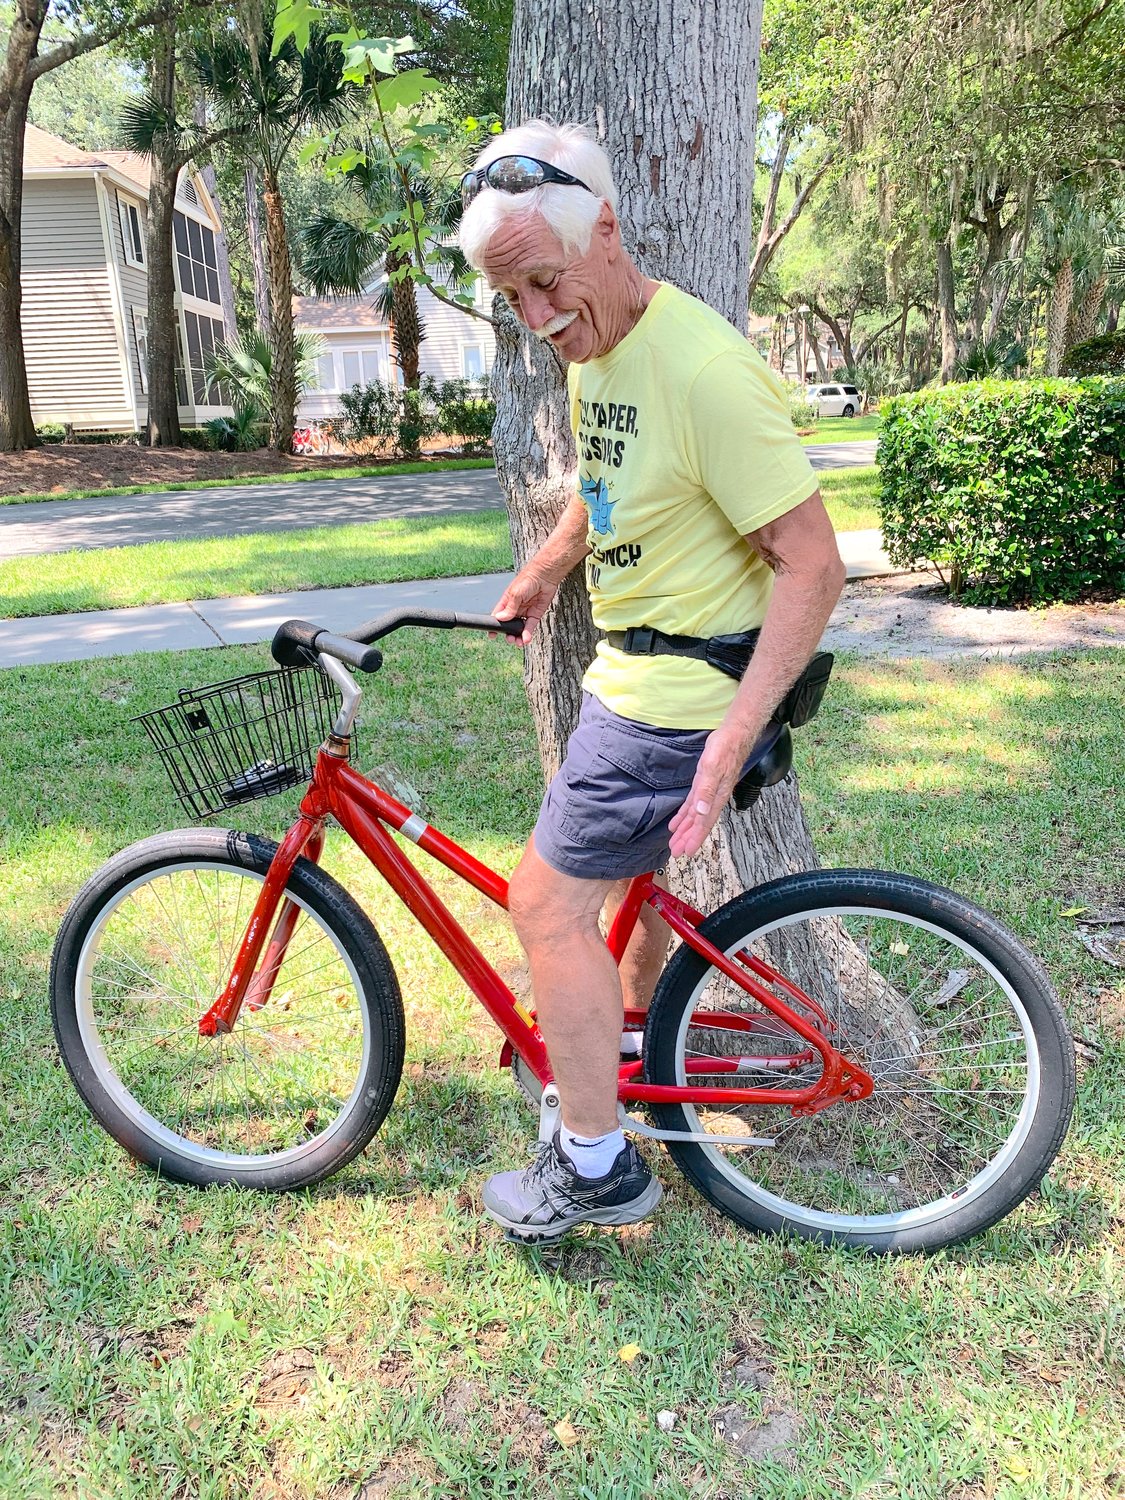 Clifford Crandall Jr. suggests you do a little parking lot practice to make sure you are stable before you get into traffic or on bicycle paths.